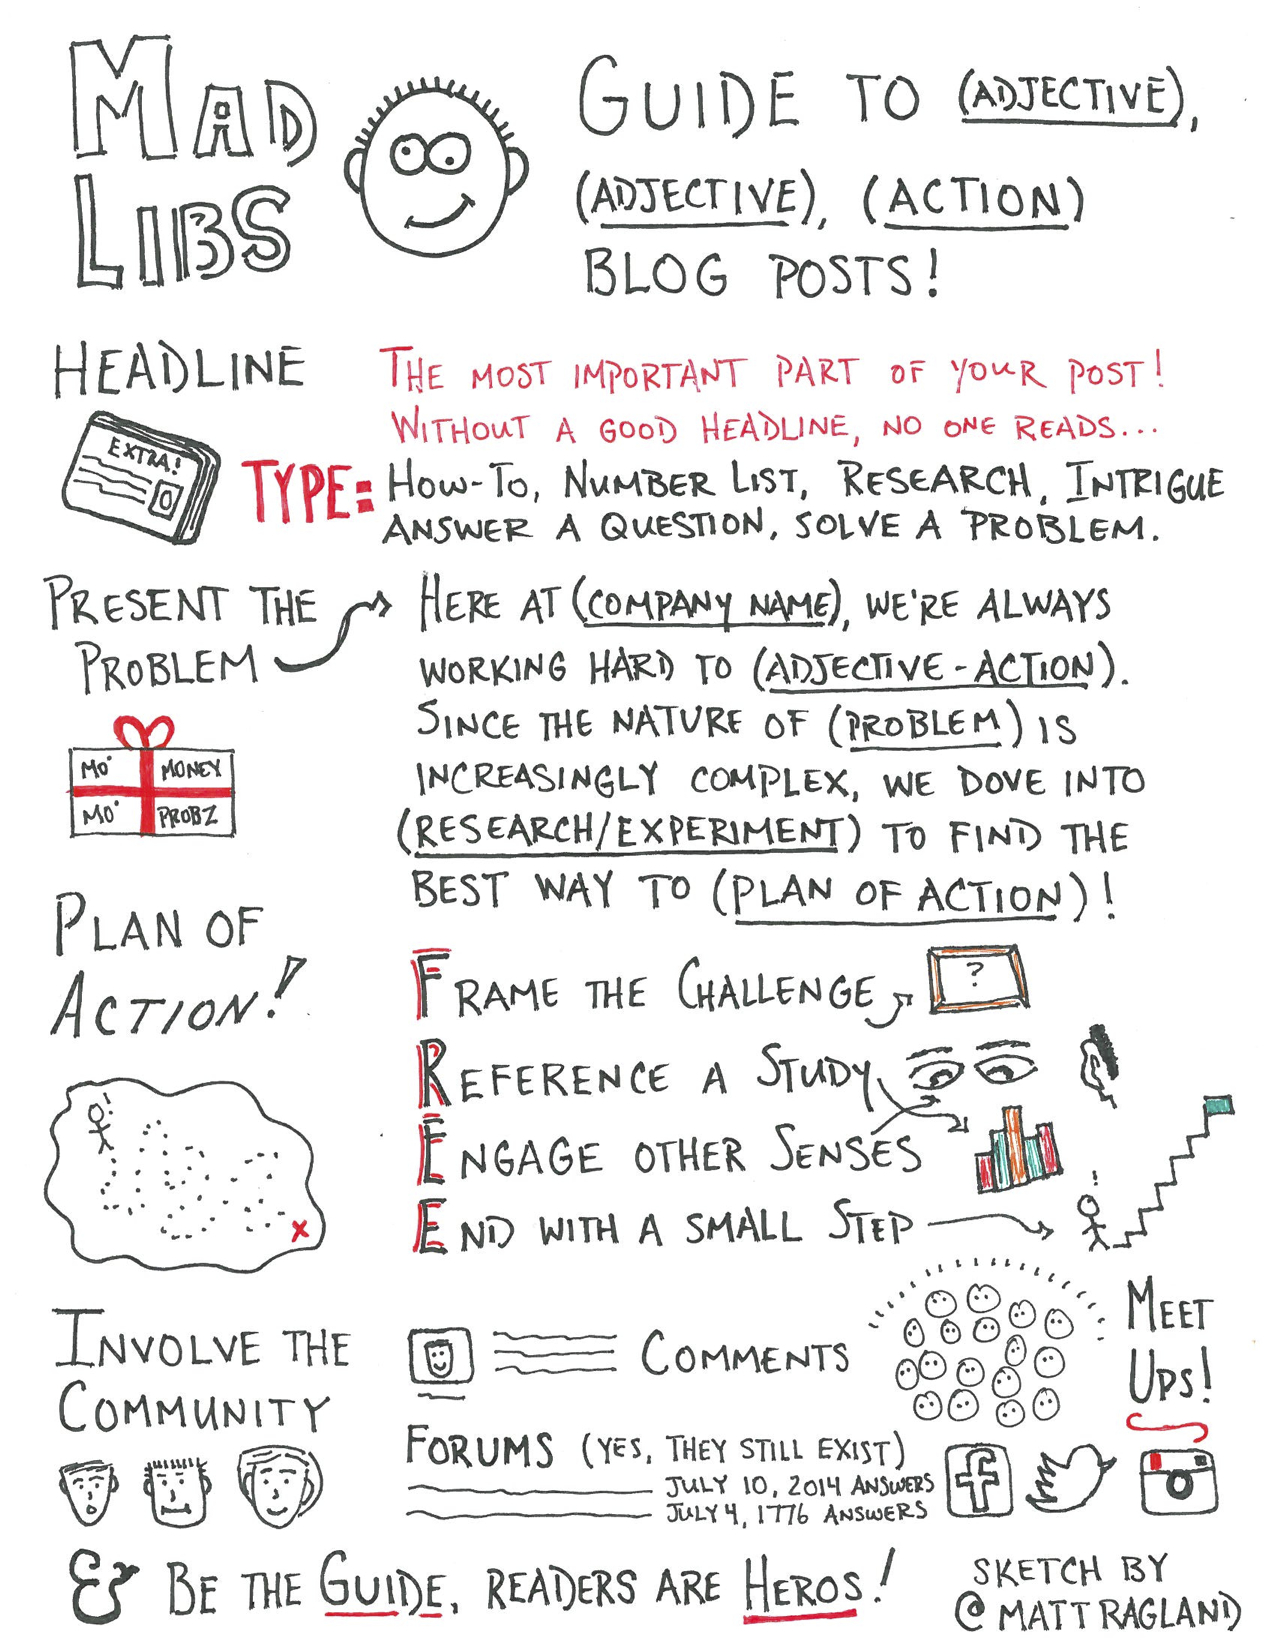 the-mad-libs-guide-to-adjective-adjective-action-blog-posts